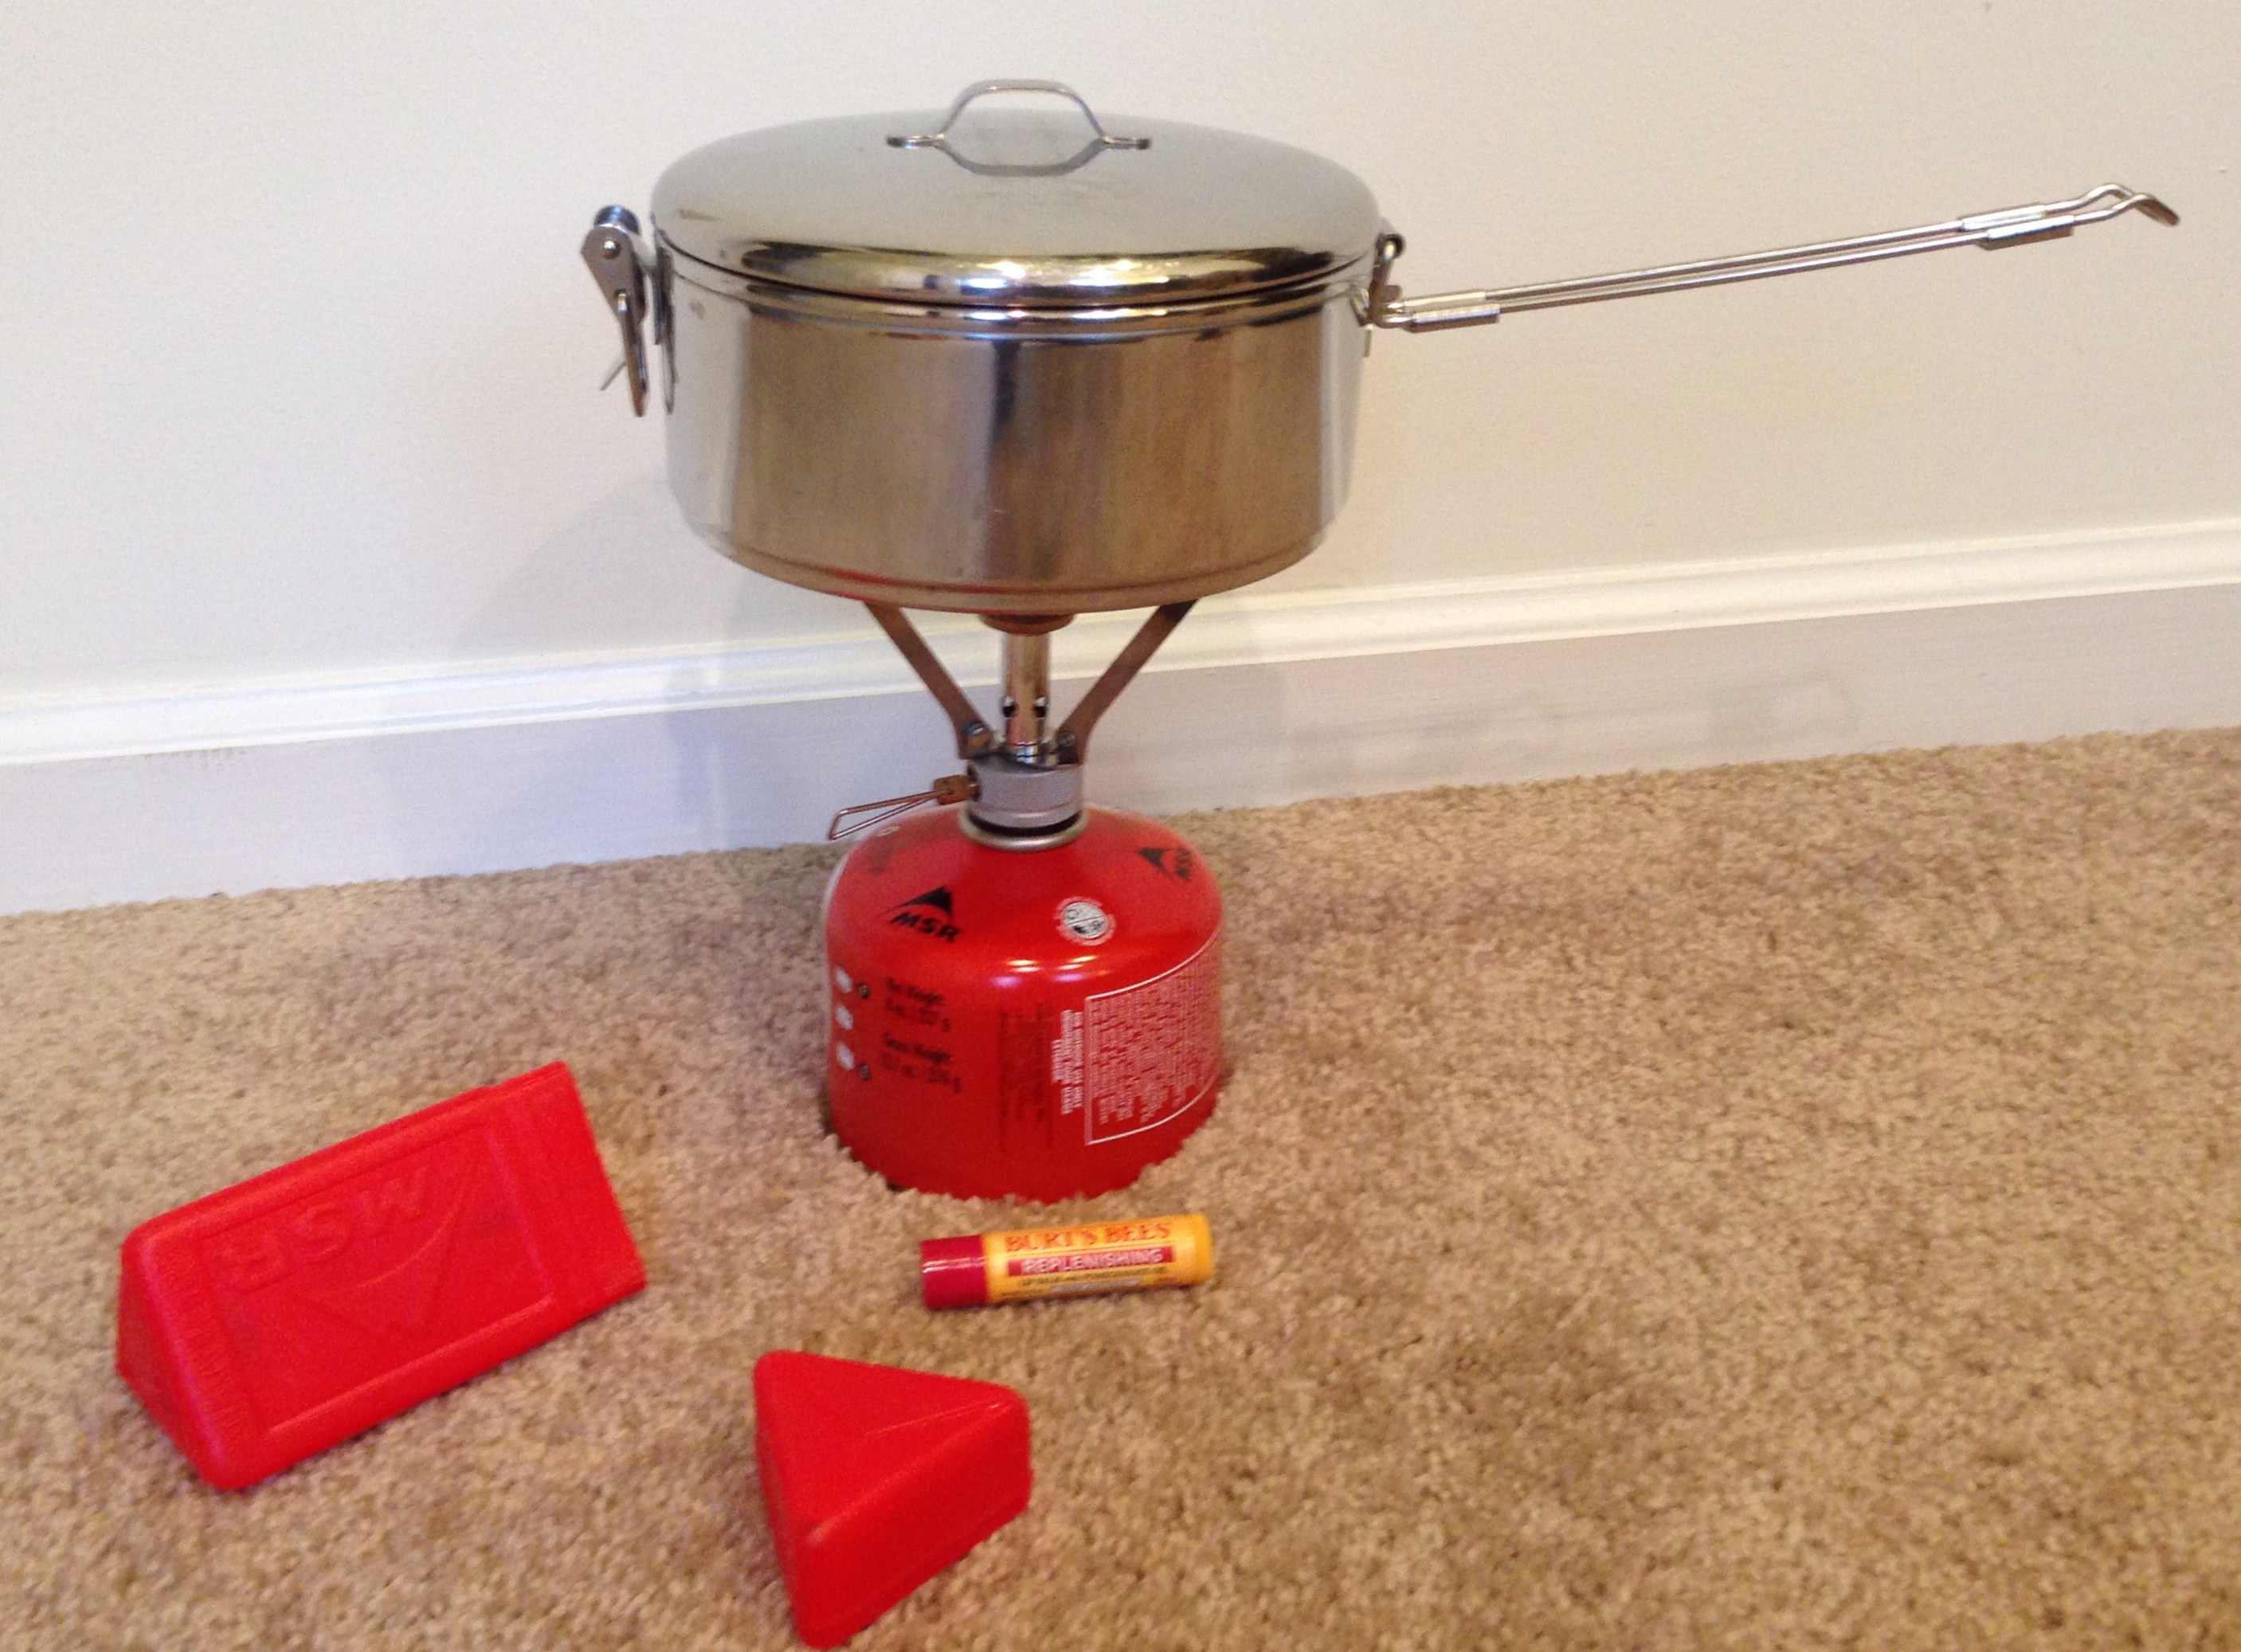 Pot/Stove/Fuel Canister ready for use